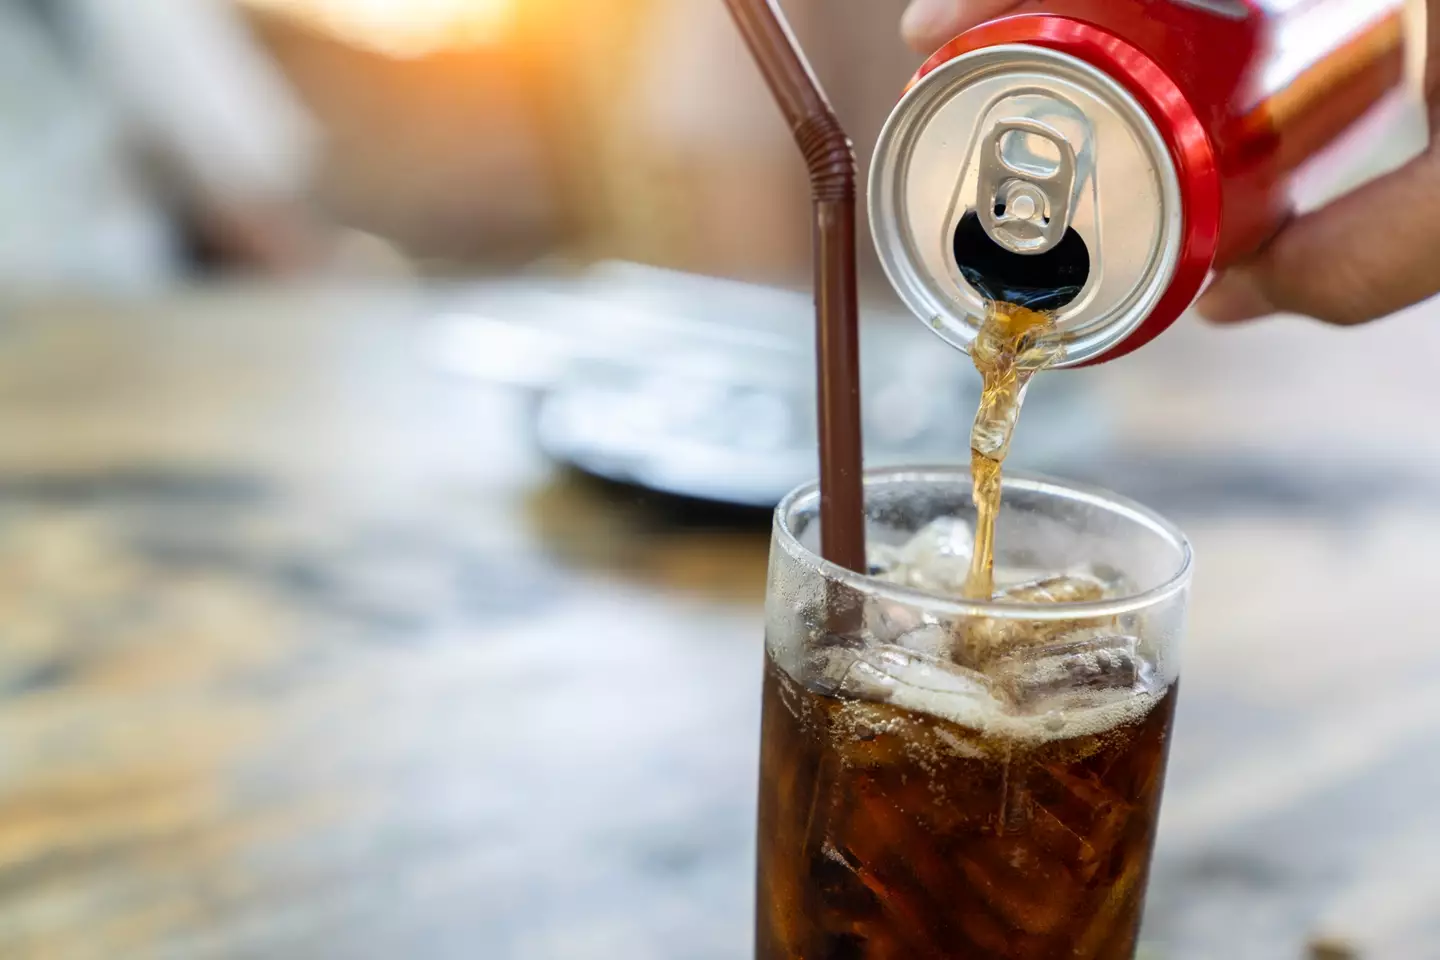 Sugary, carbonated drinks found to be one of the most unhealthy of processed foods. (Virojt Changyencham/Getty)